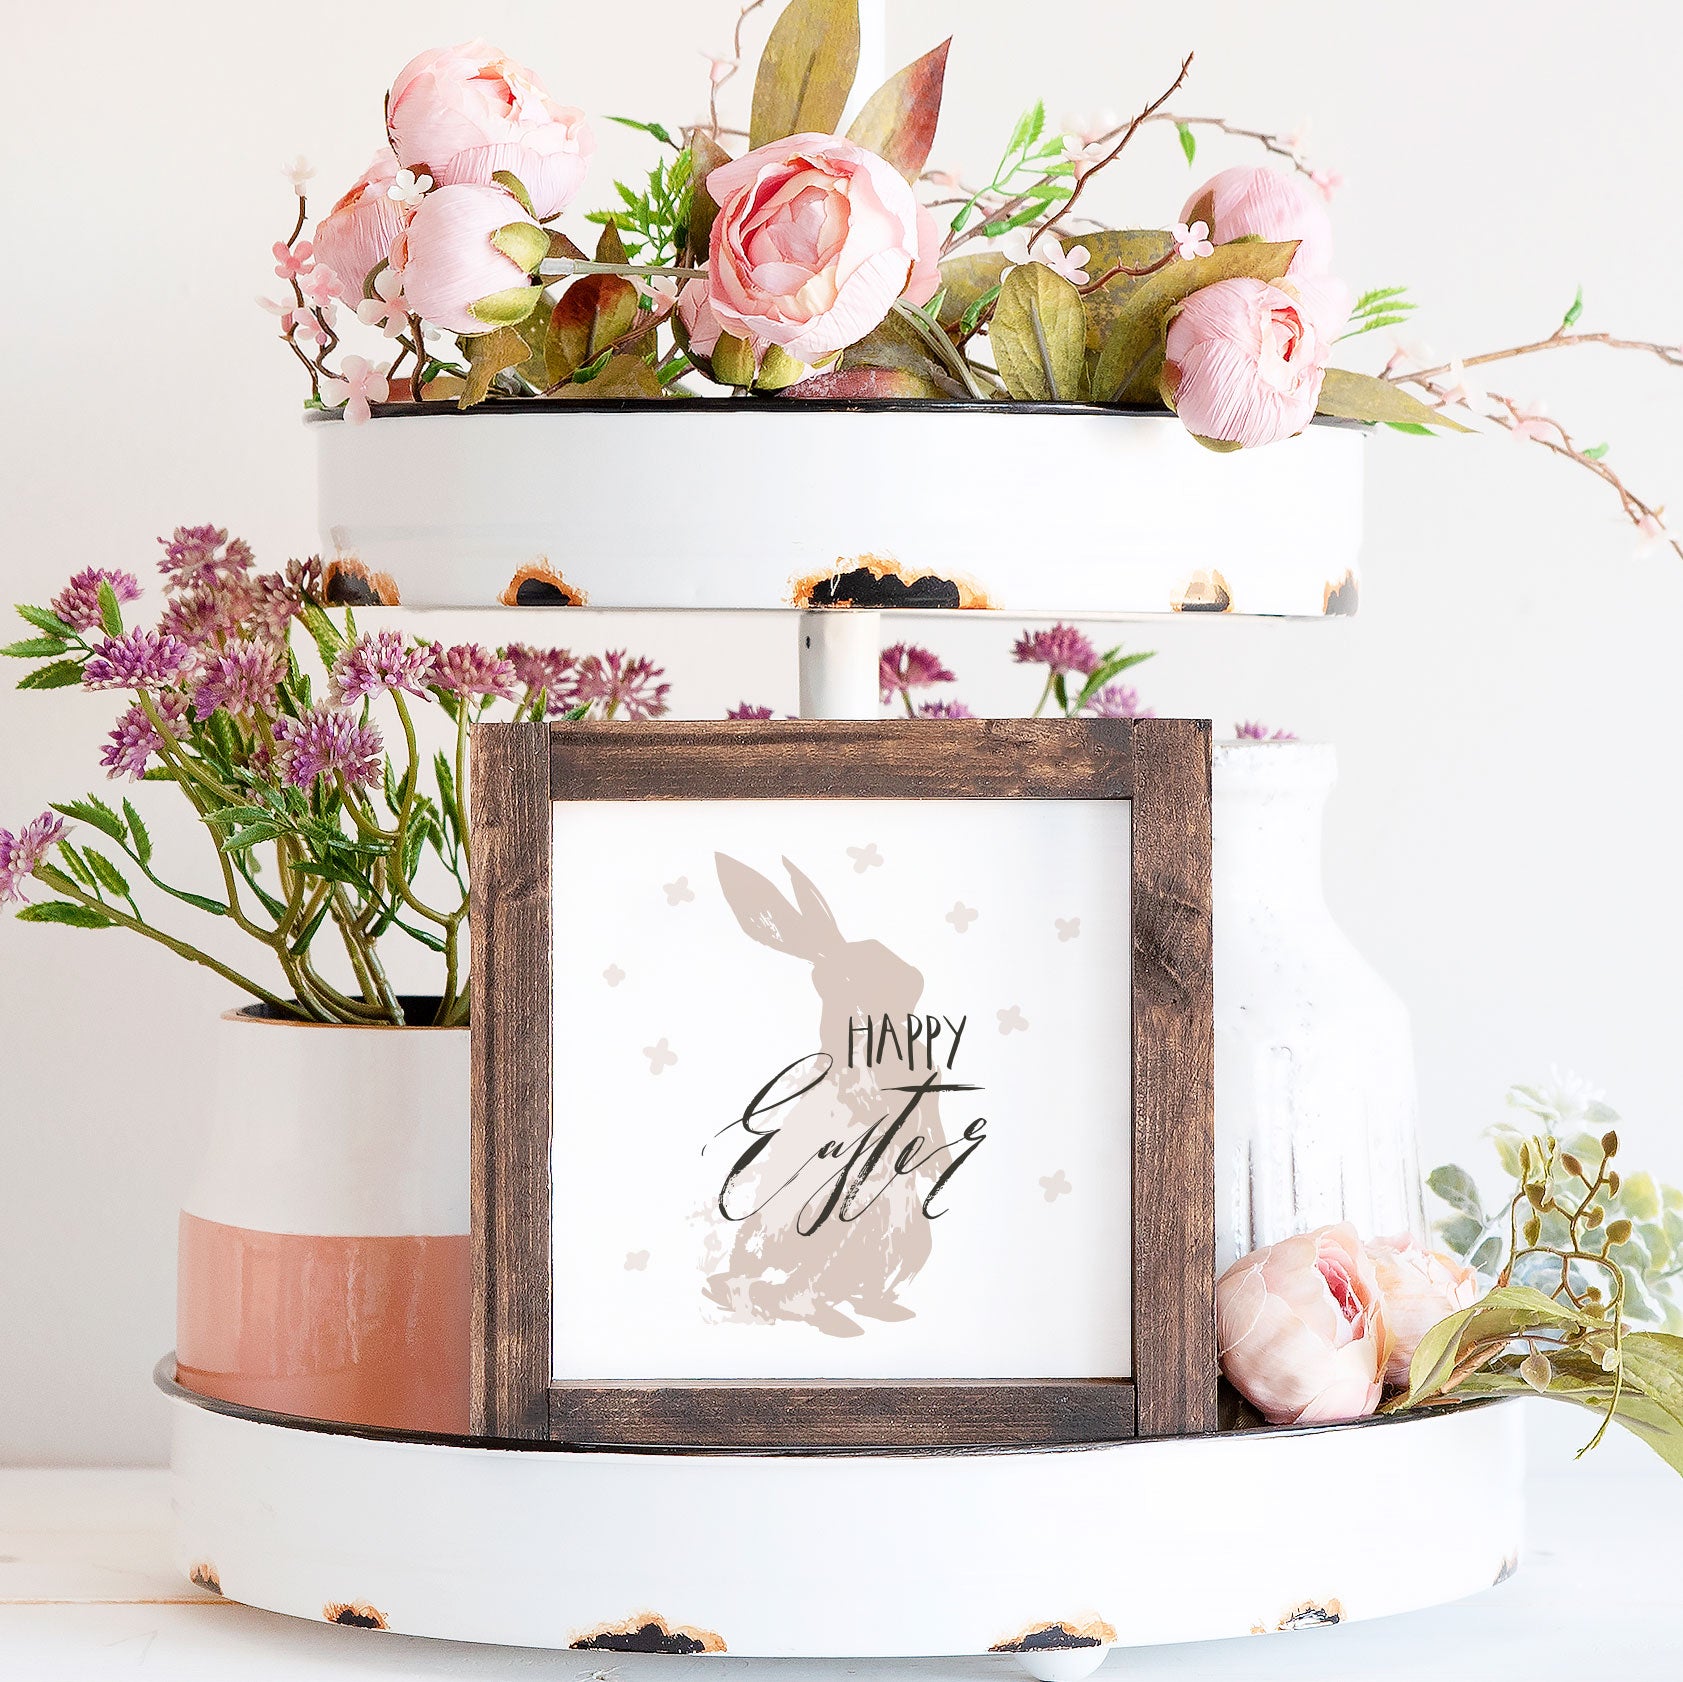 Bunny Splash, Spring Decor, Easter Decor , Small Wood Sign Wood Signs The WAREHOUSE Studio 